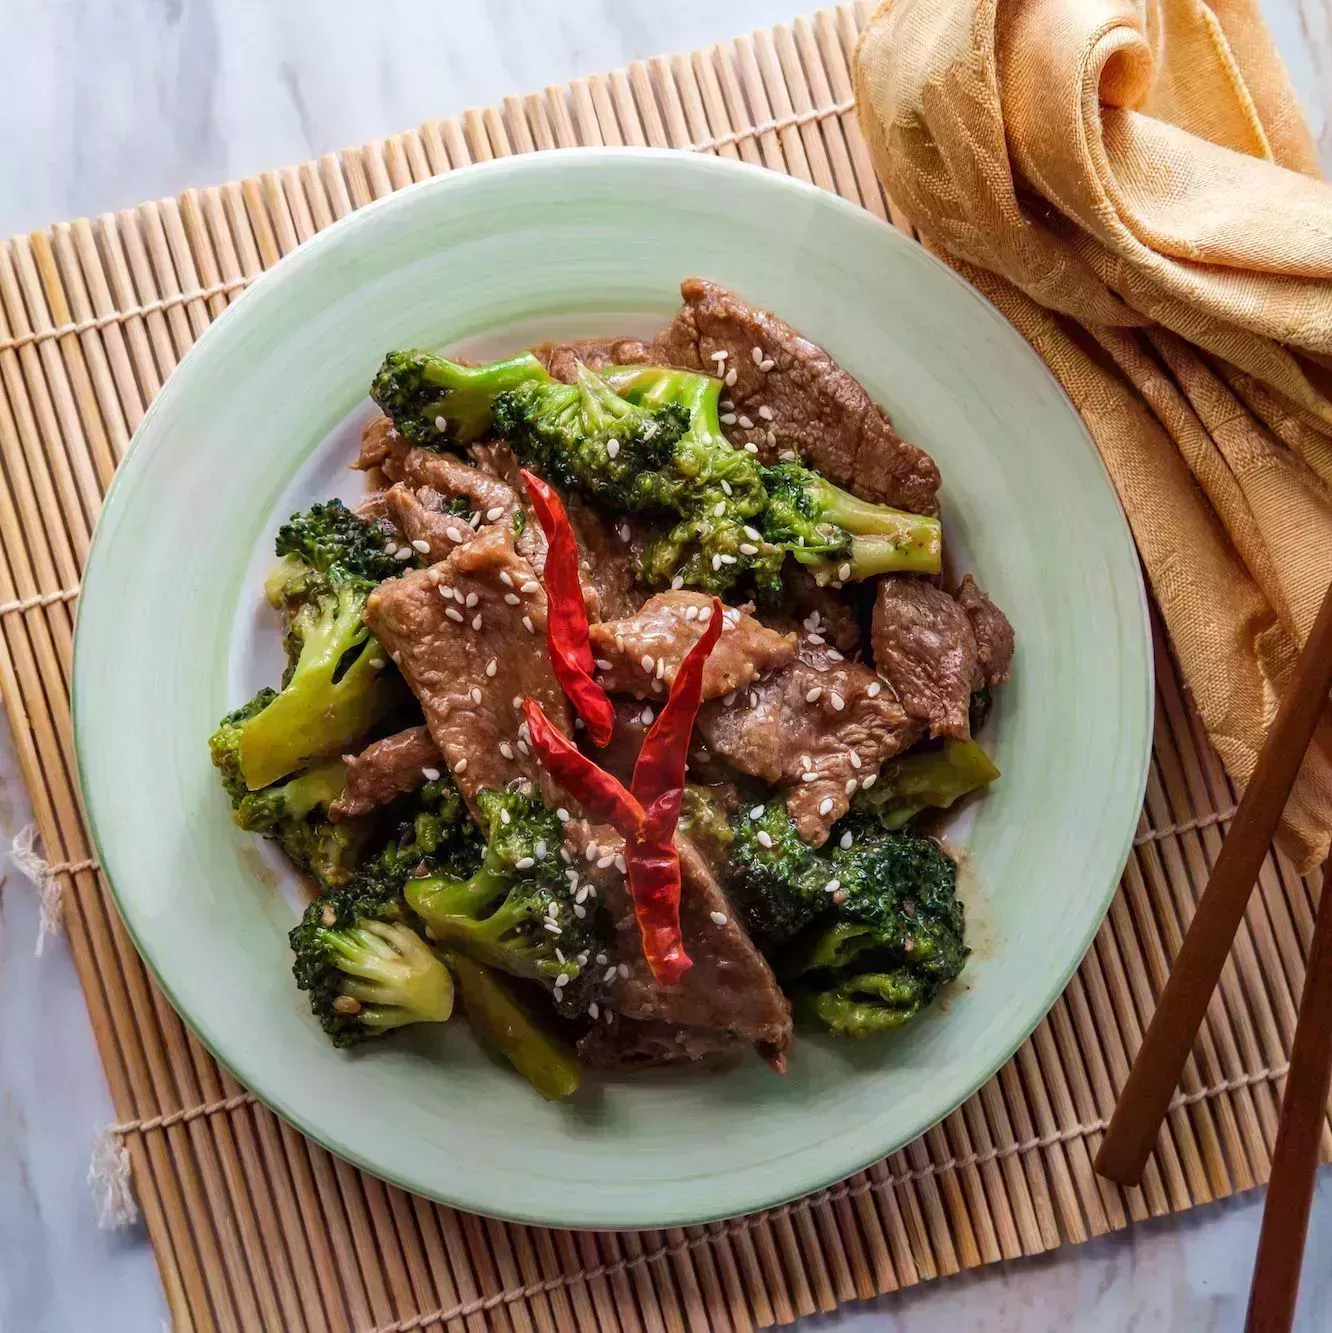 szechuan stir fried beef with broccoli and hot peppers